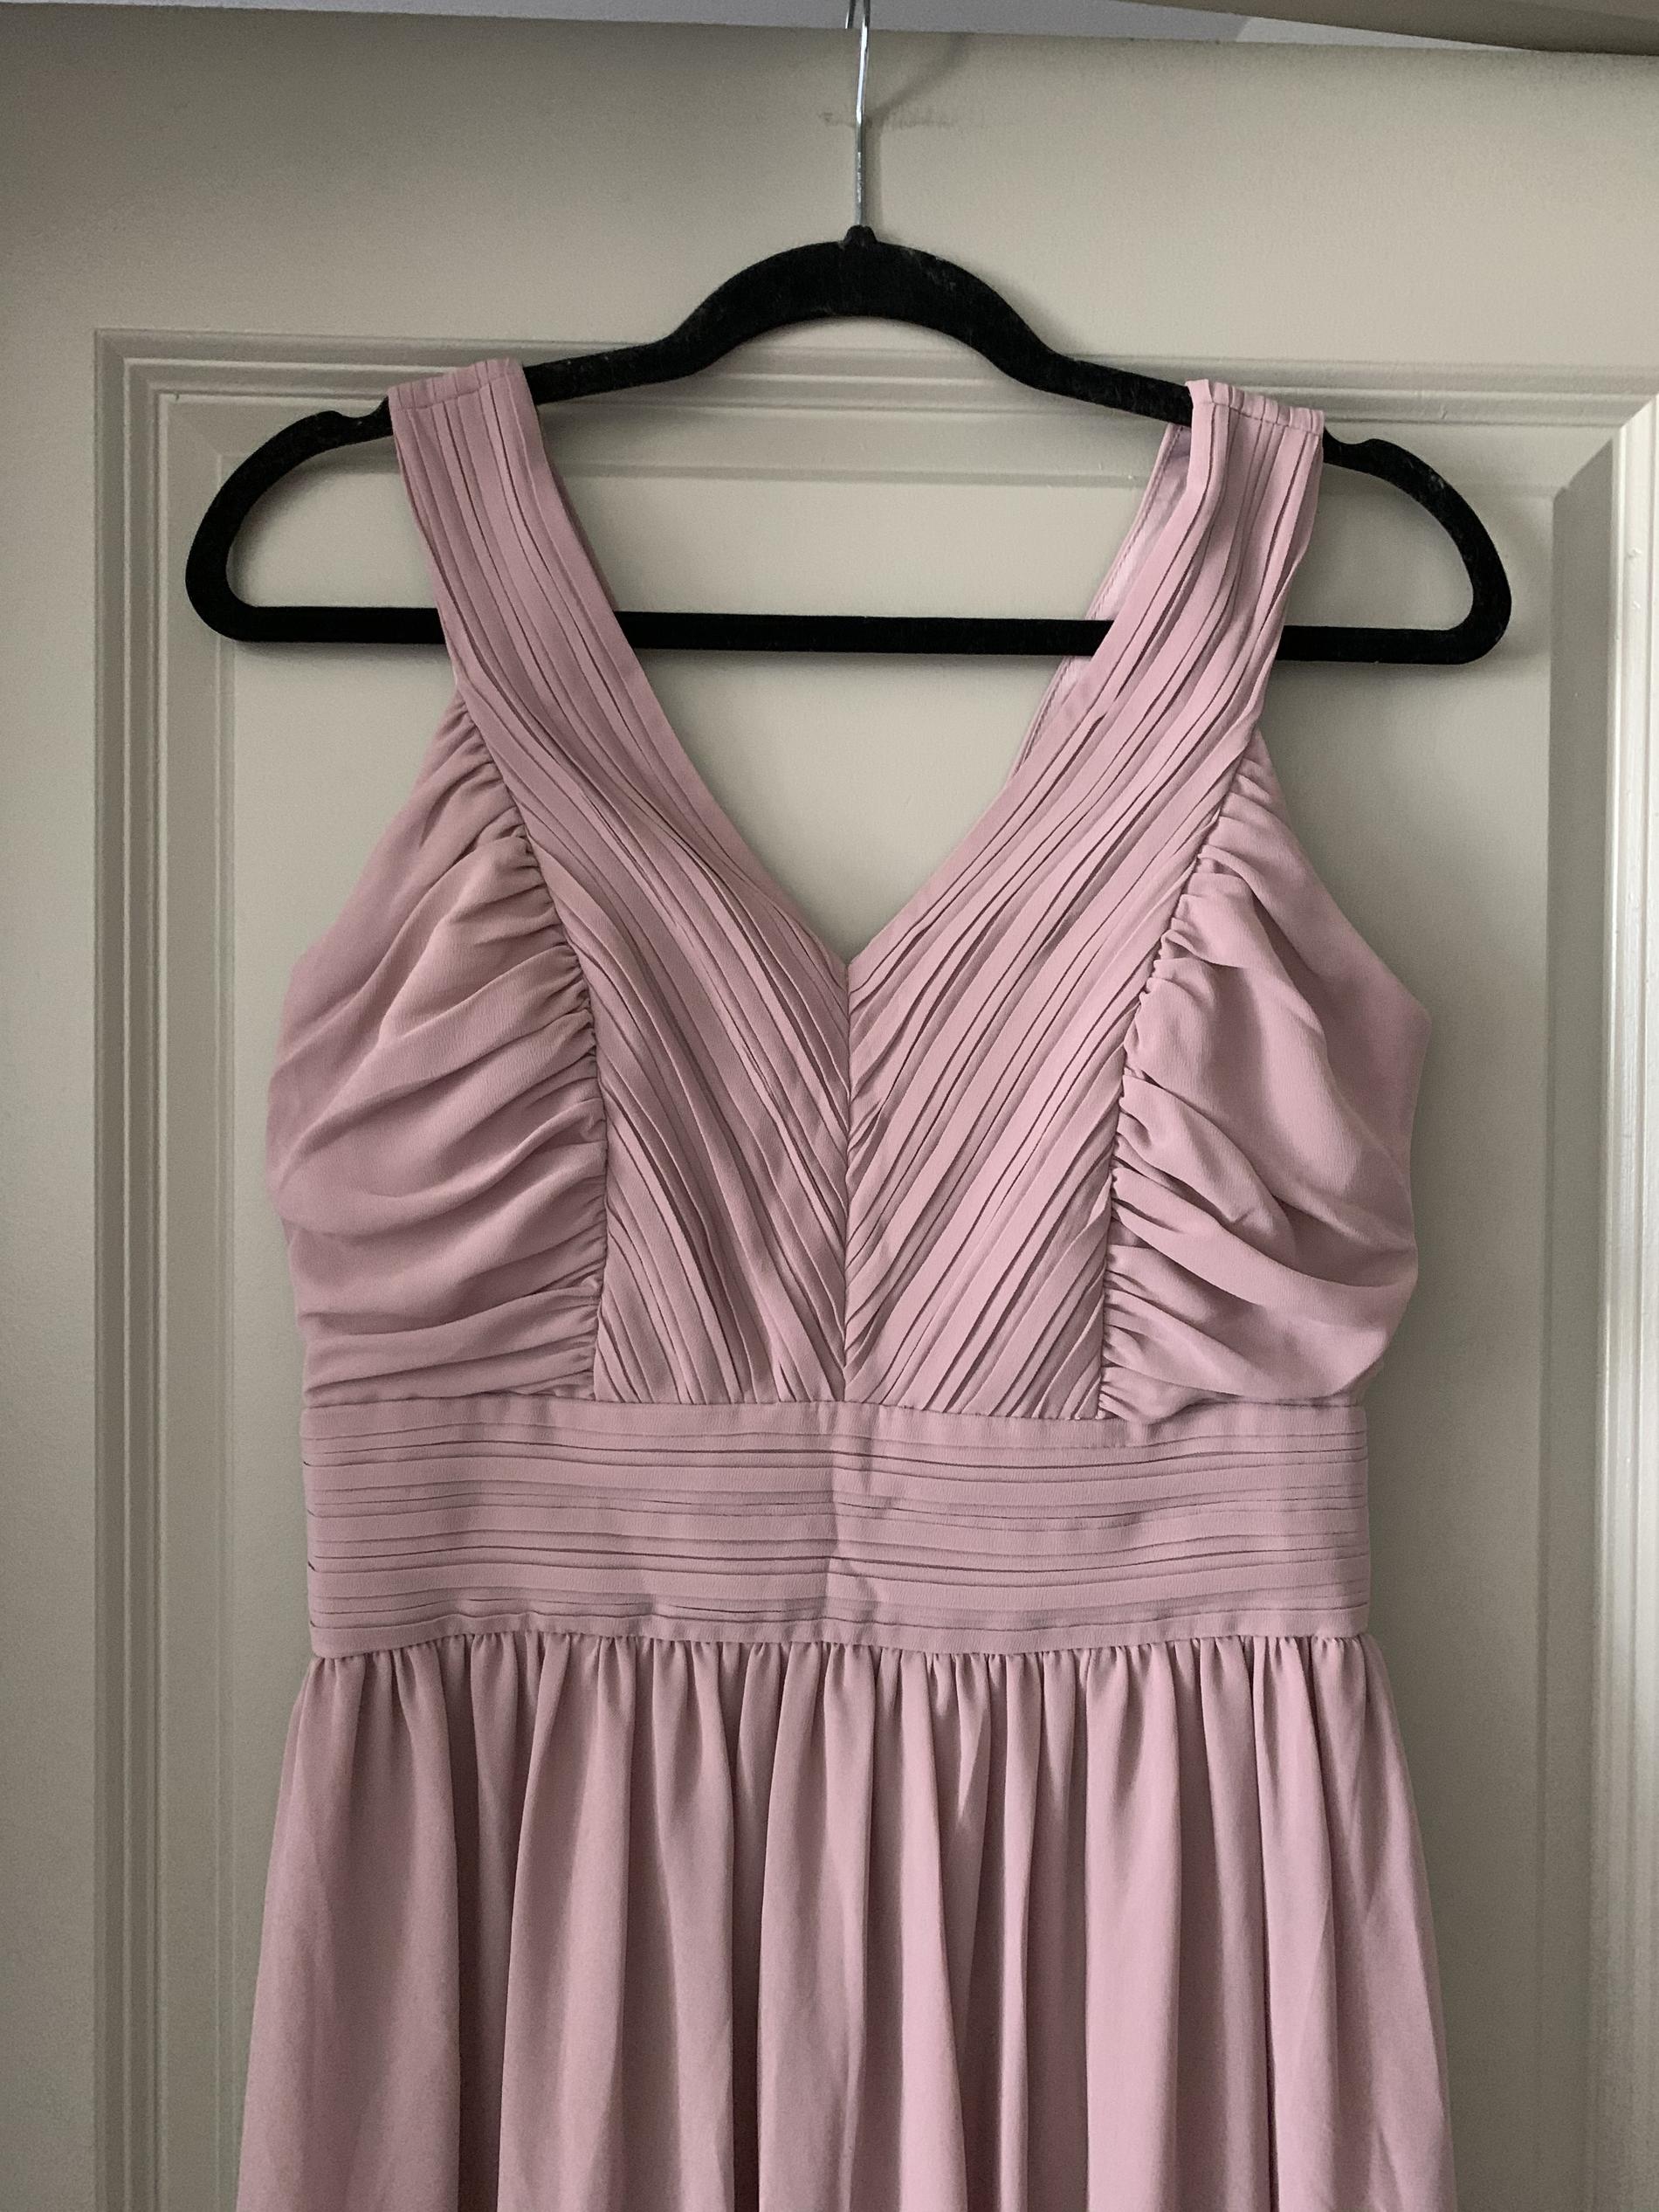 Minuet for Modcloth Size 6 Pink A-line Dress on Queenly